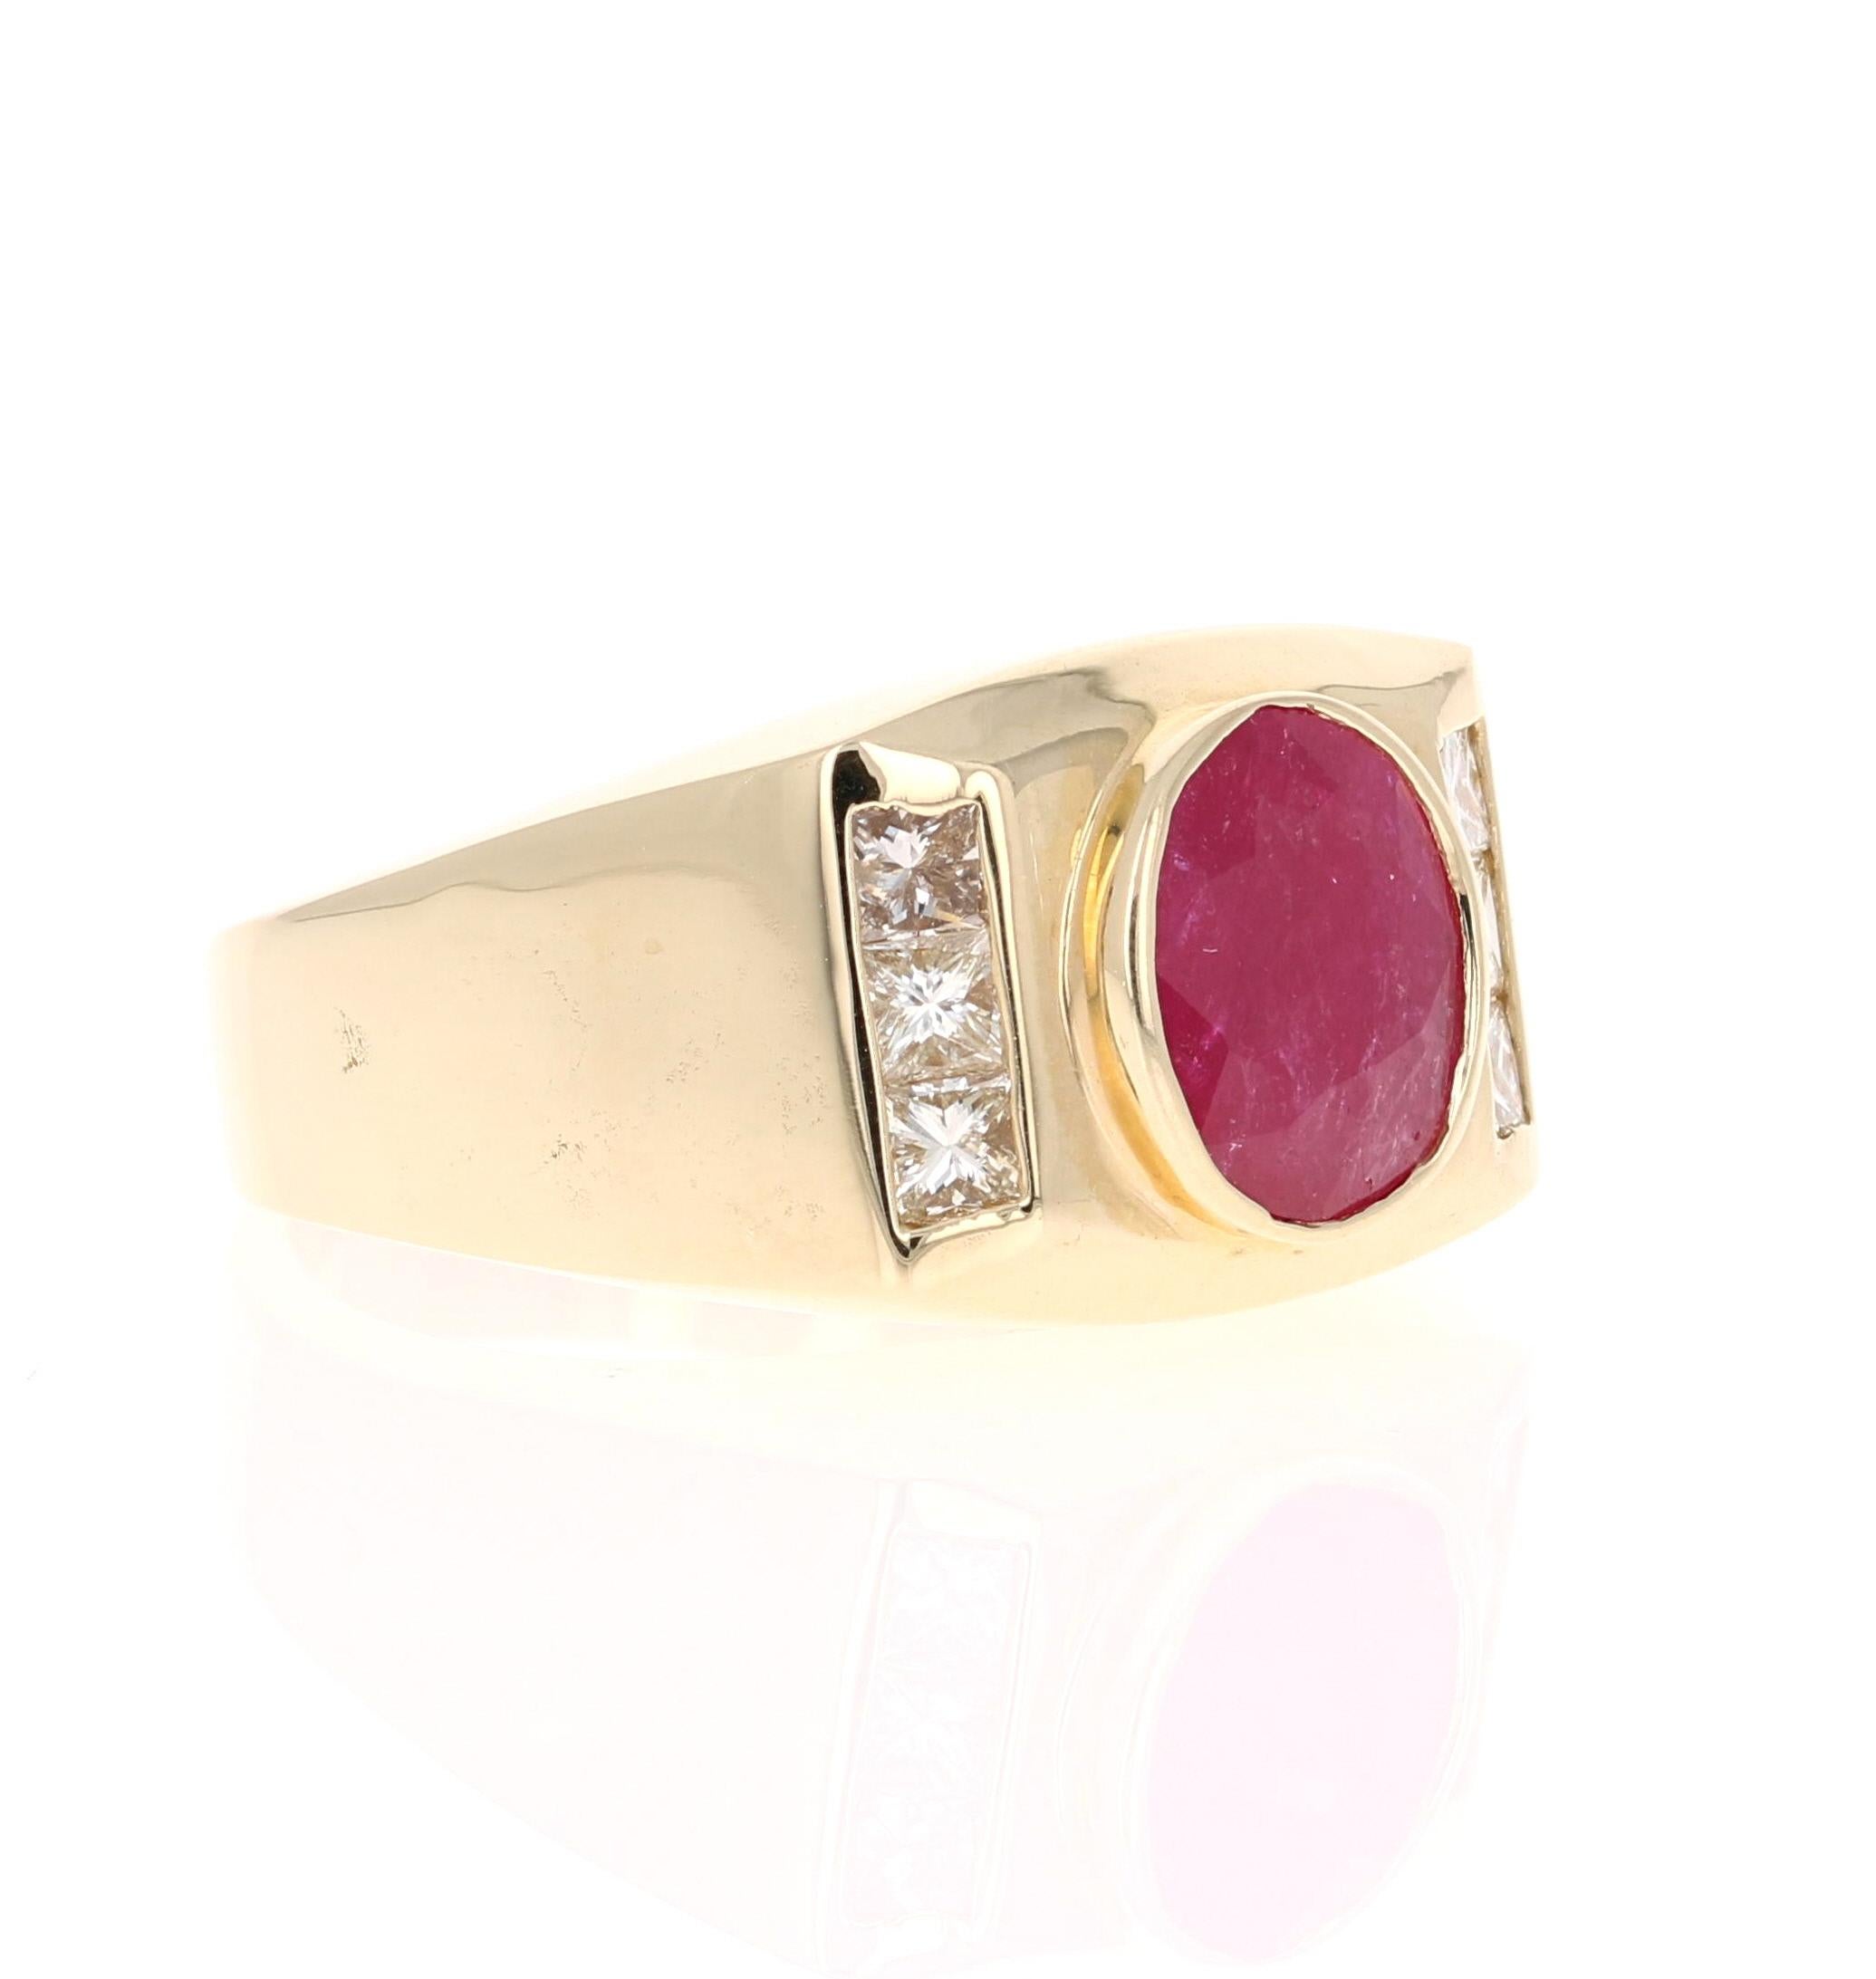 We also carry a unique Men's Collection of Wedding Bands & Rings! 

This amazing piece is set with a beautiful oval cut Ruby that weighs 2.23 Carats and has 6 Princess Cut Diamonds that weighs 0.70 Carats. The Total Carat Weight of the ring is 2.93